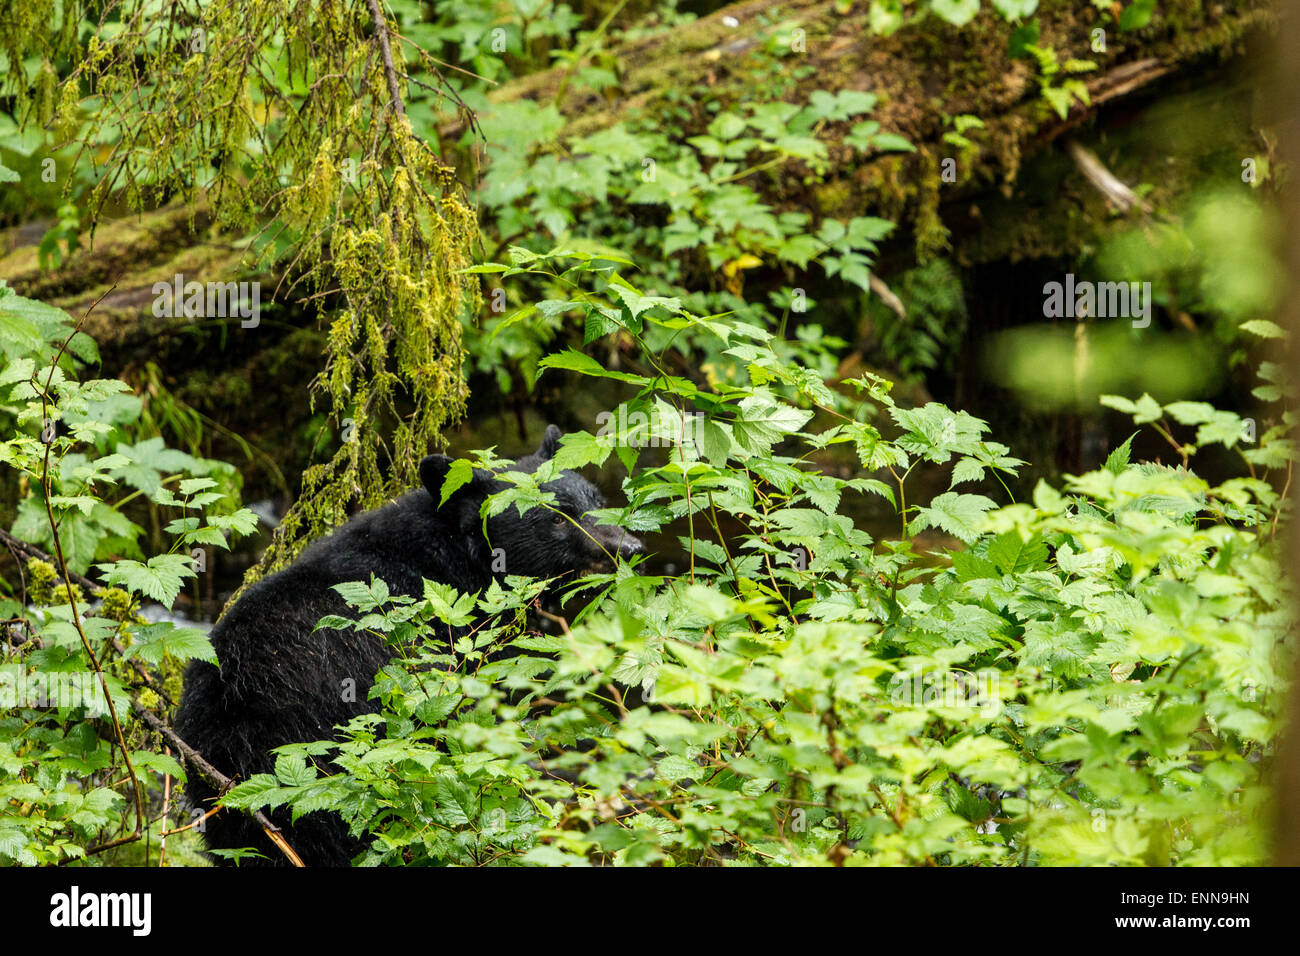 Temperate forest animals hi-res stock photography and images - Alamy